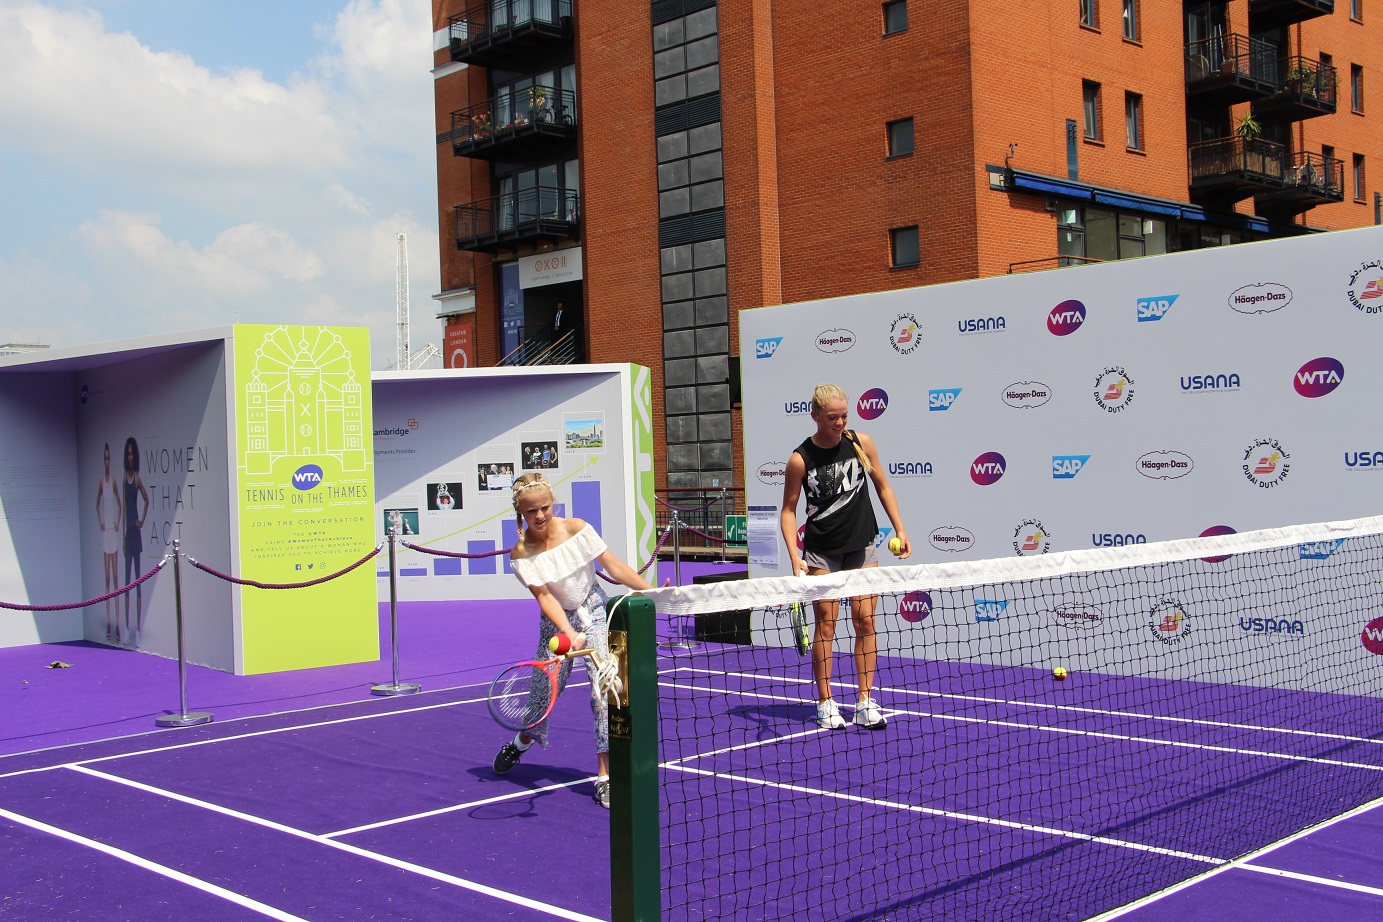 Elena Baltacha Foundation youngster Amie Hunt at WTA Tennis on the Thames, playing doubles with Katie Swan